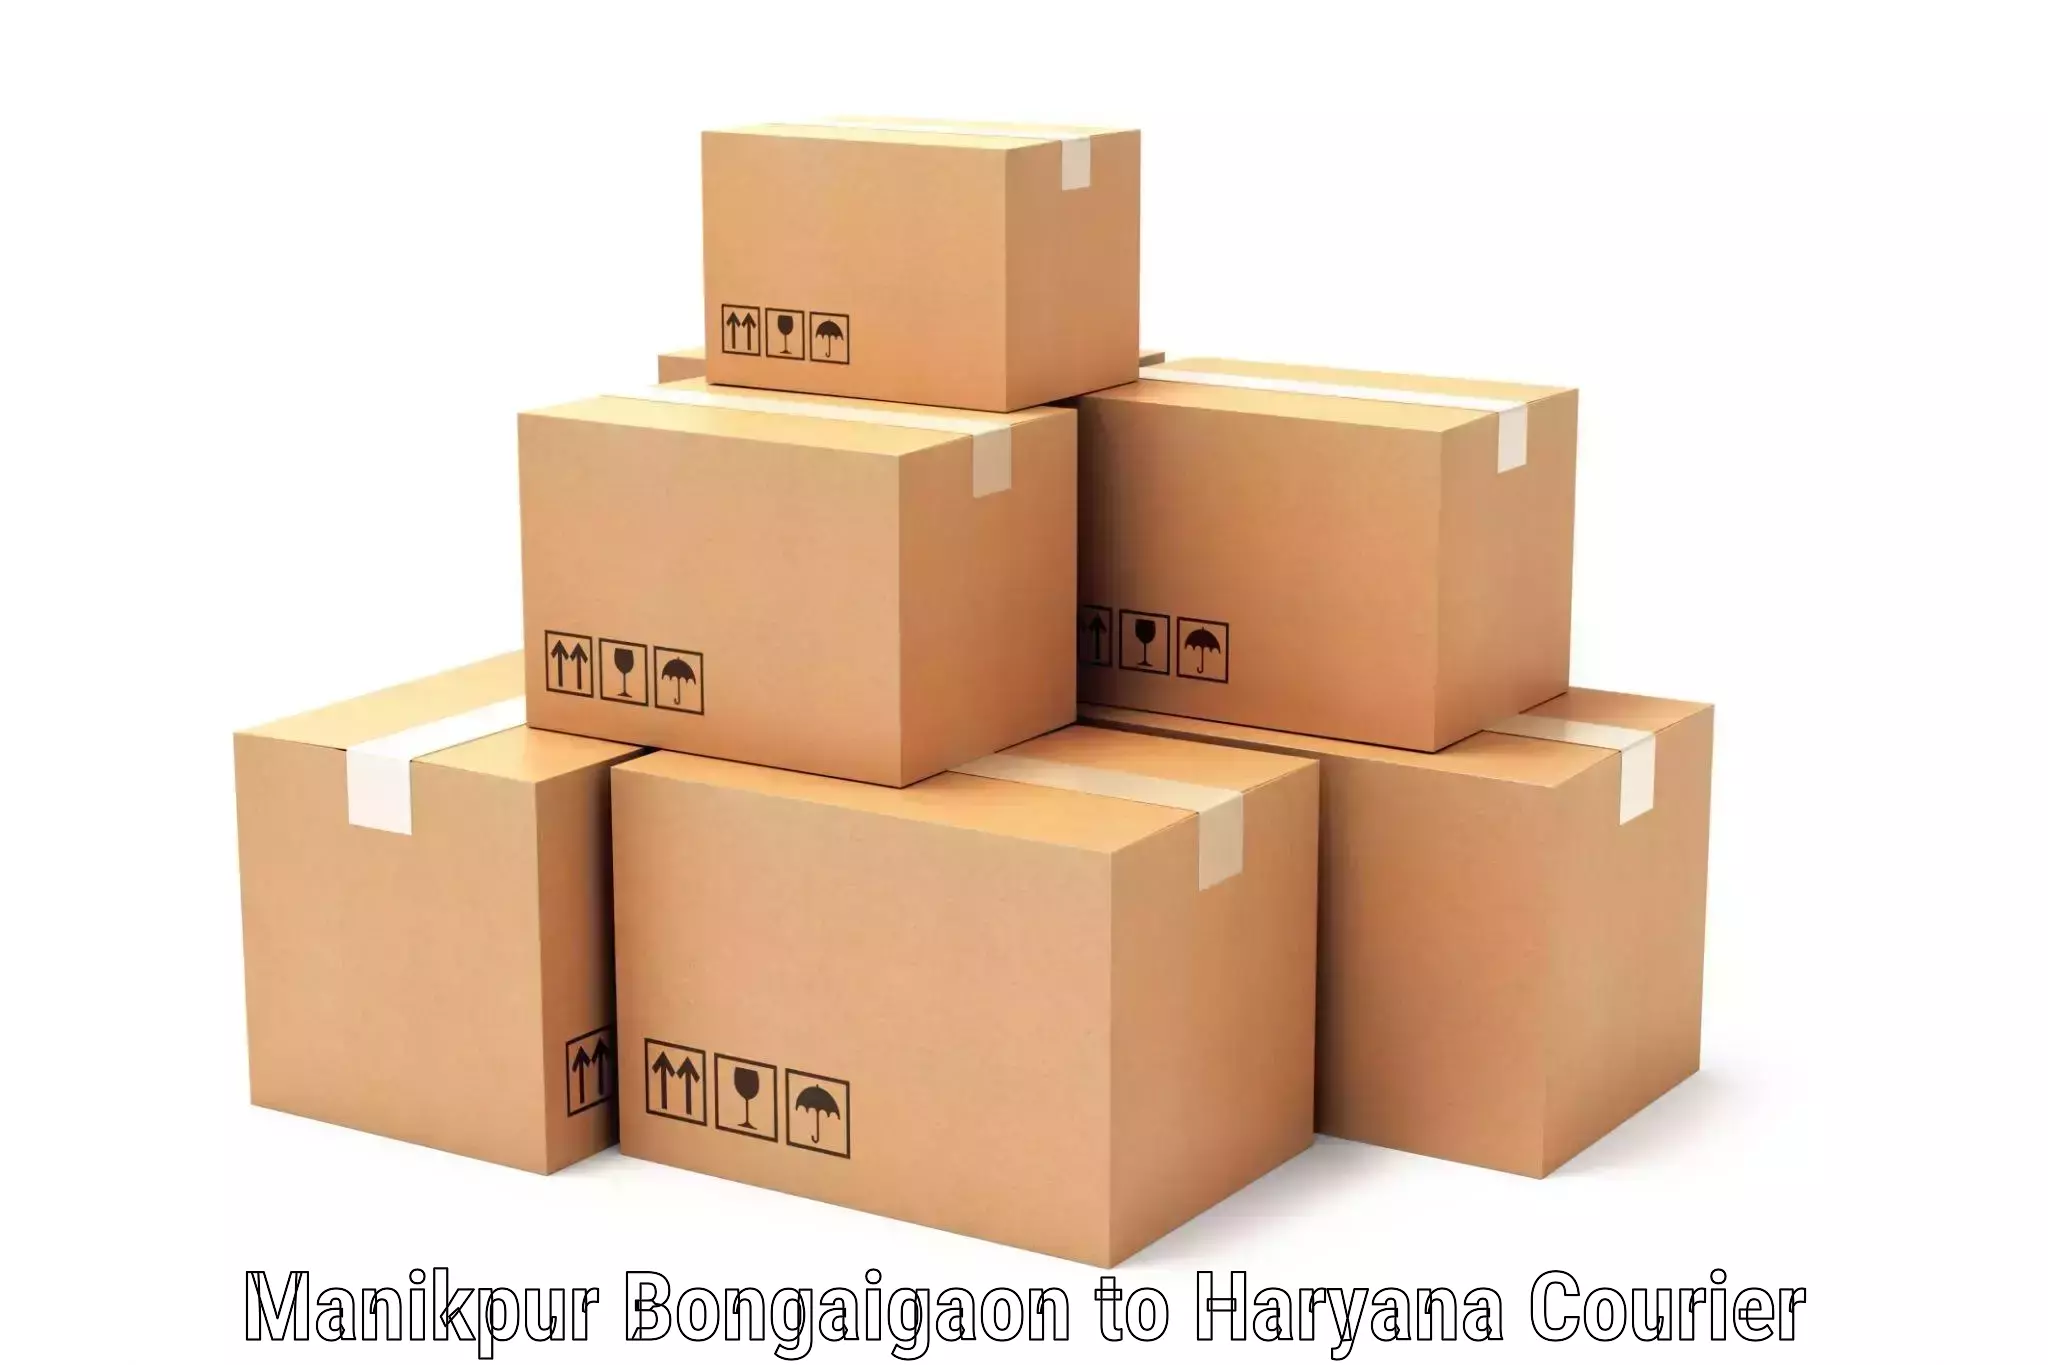 Express package services in Manikpur Bongaigaon to Gurgaon